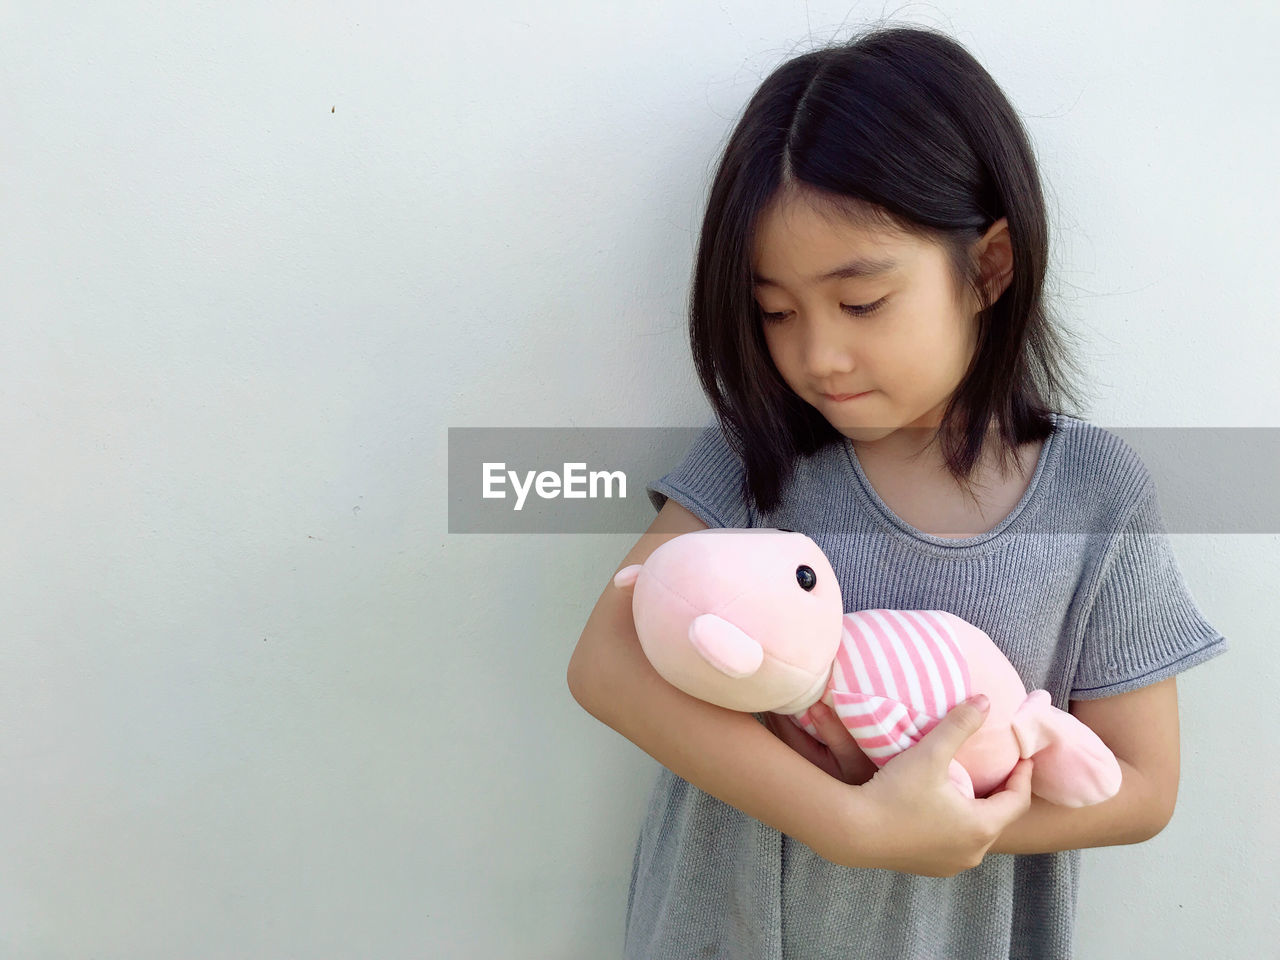 childhood, one person, child, piggy bank, holding, savings, women, pink, indoors, investment, finance, female, human head, front view, person, copy space, nose, black hair, casual clothing, smiling, currency, egg, waist up, emotion, hand, portrait, cute, skin, studio shot, happiness, animal representation, looking, hairstyle, innocence, business, long hair, coin, toy